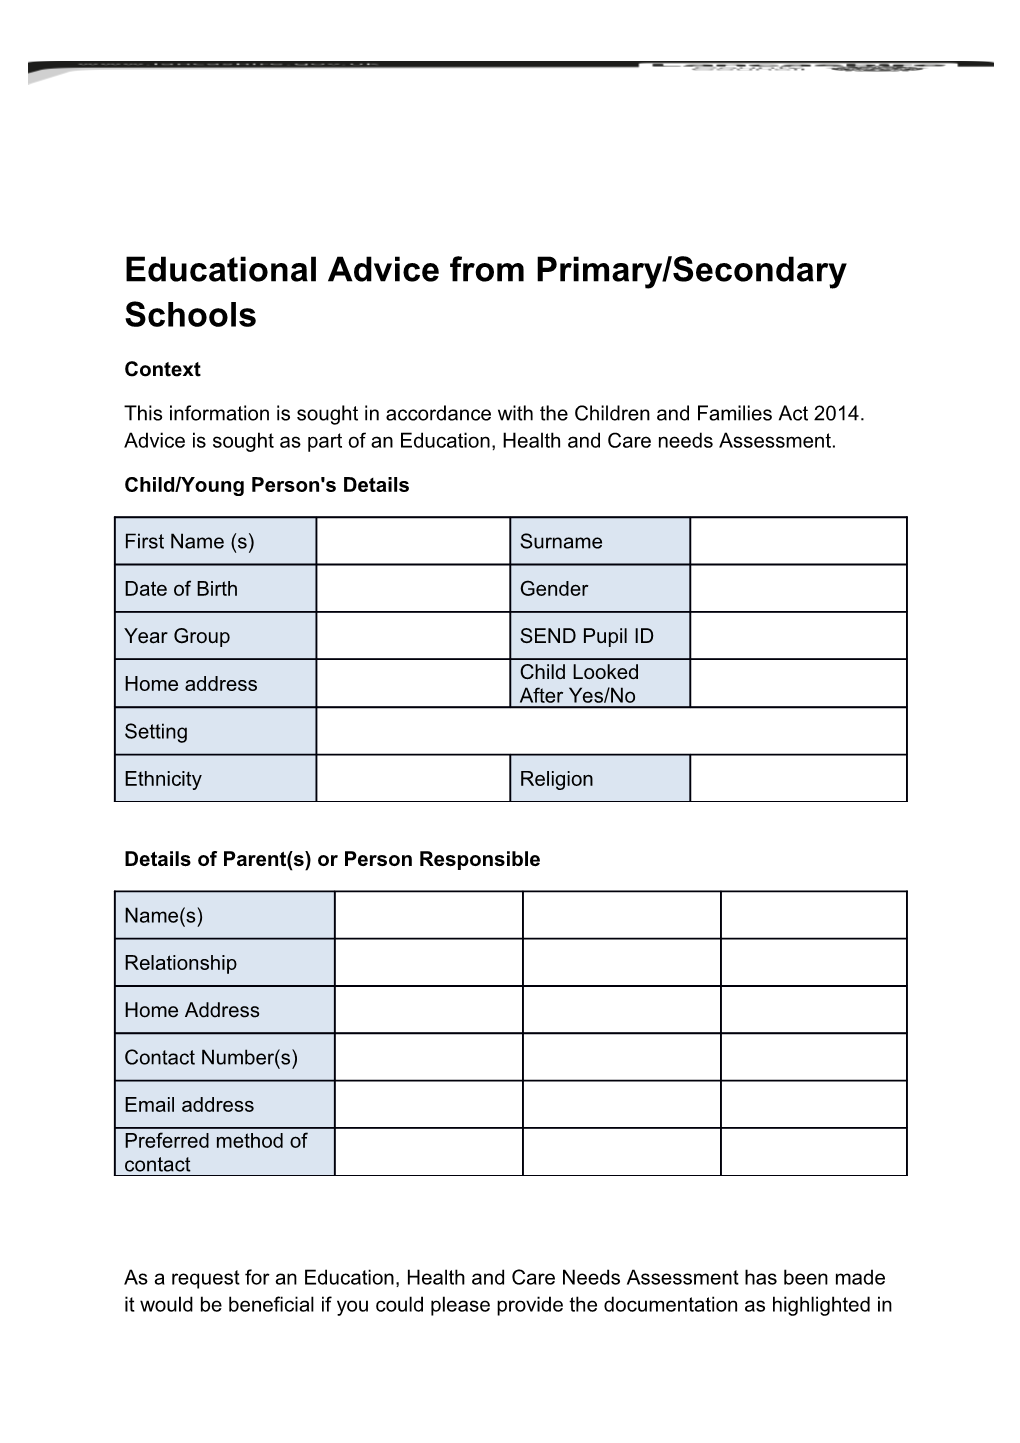 Educational Advice from Primary/Secondary Schools